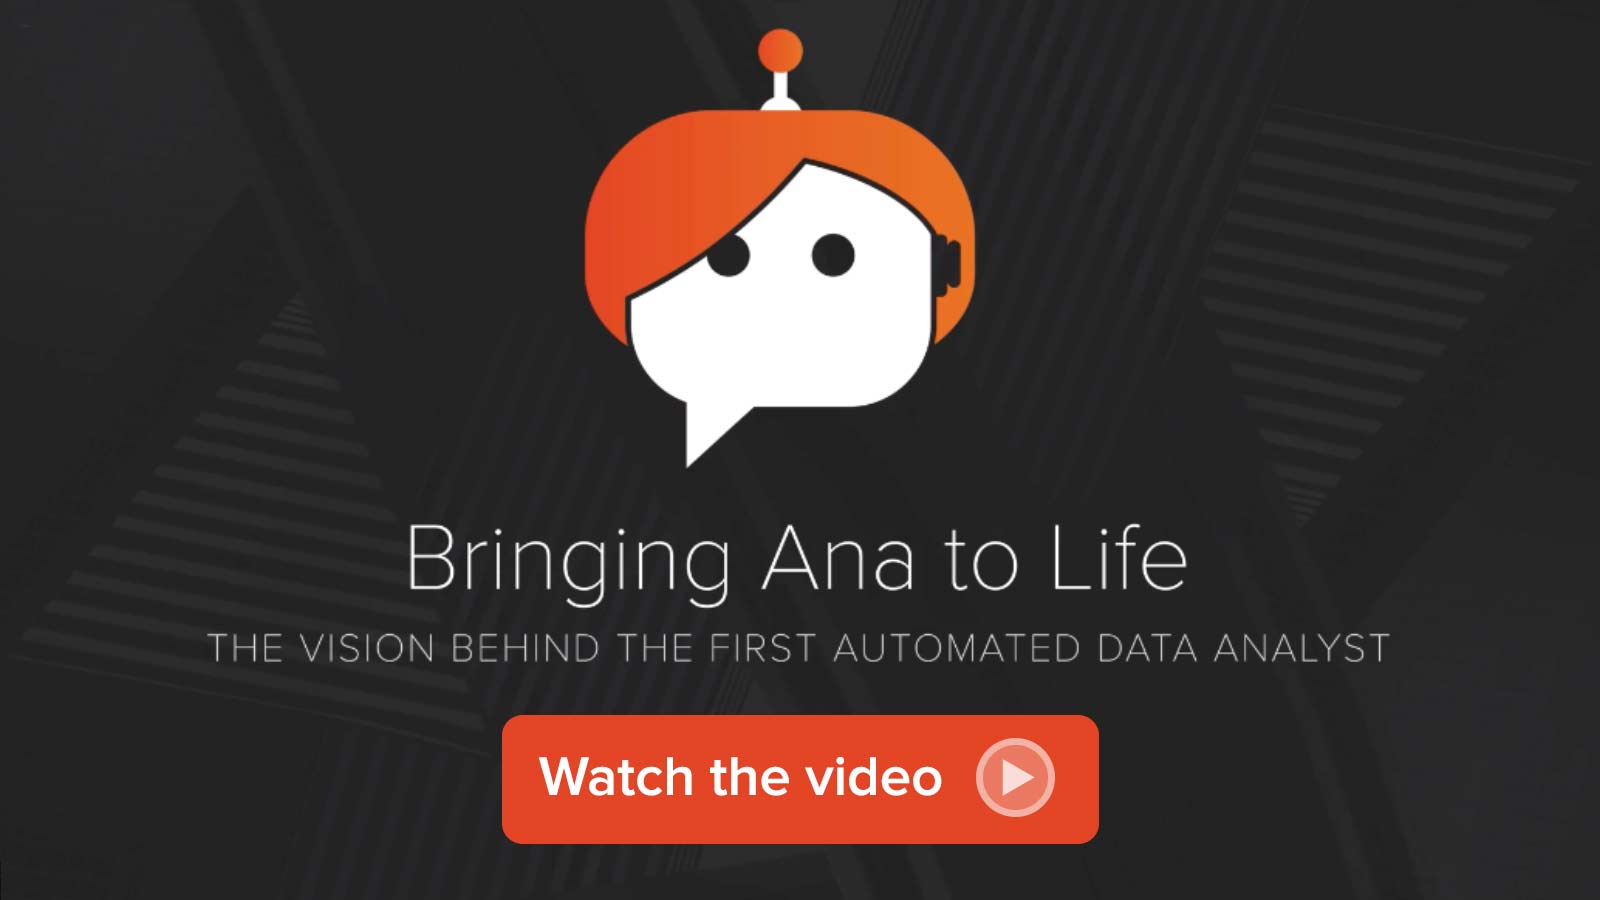 Watch the Ana Vision video